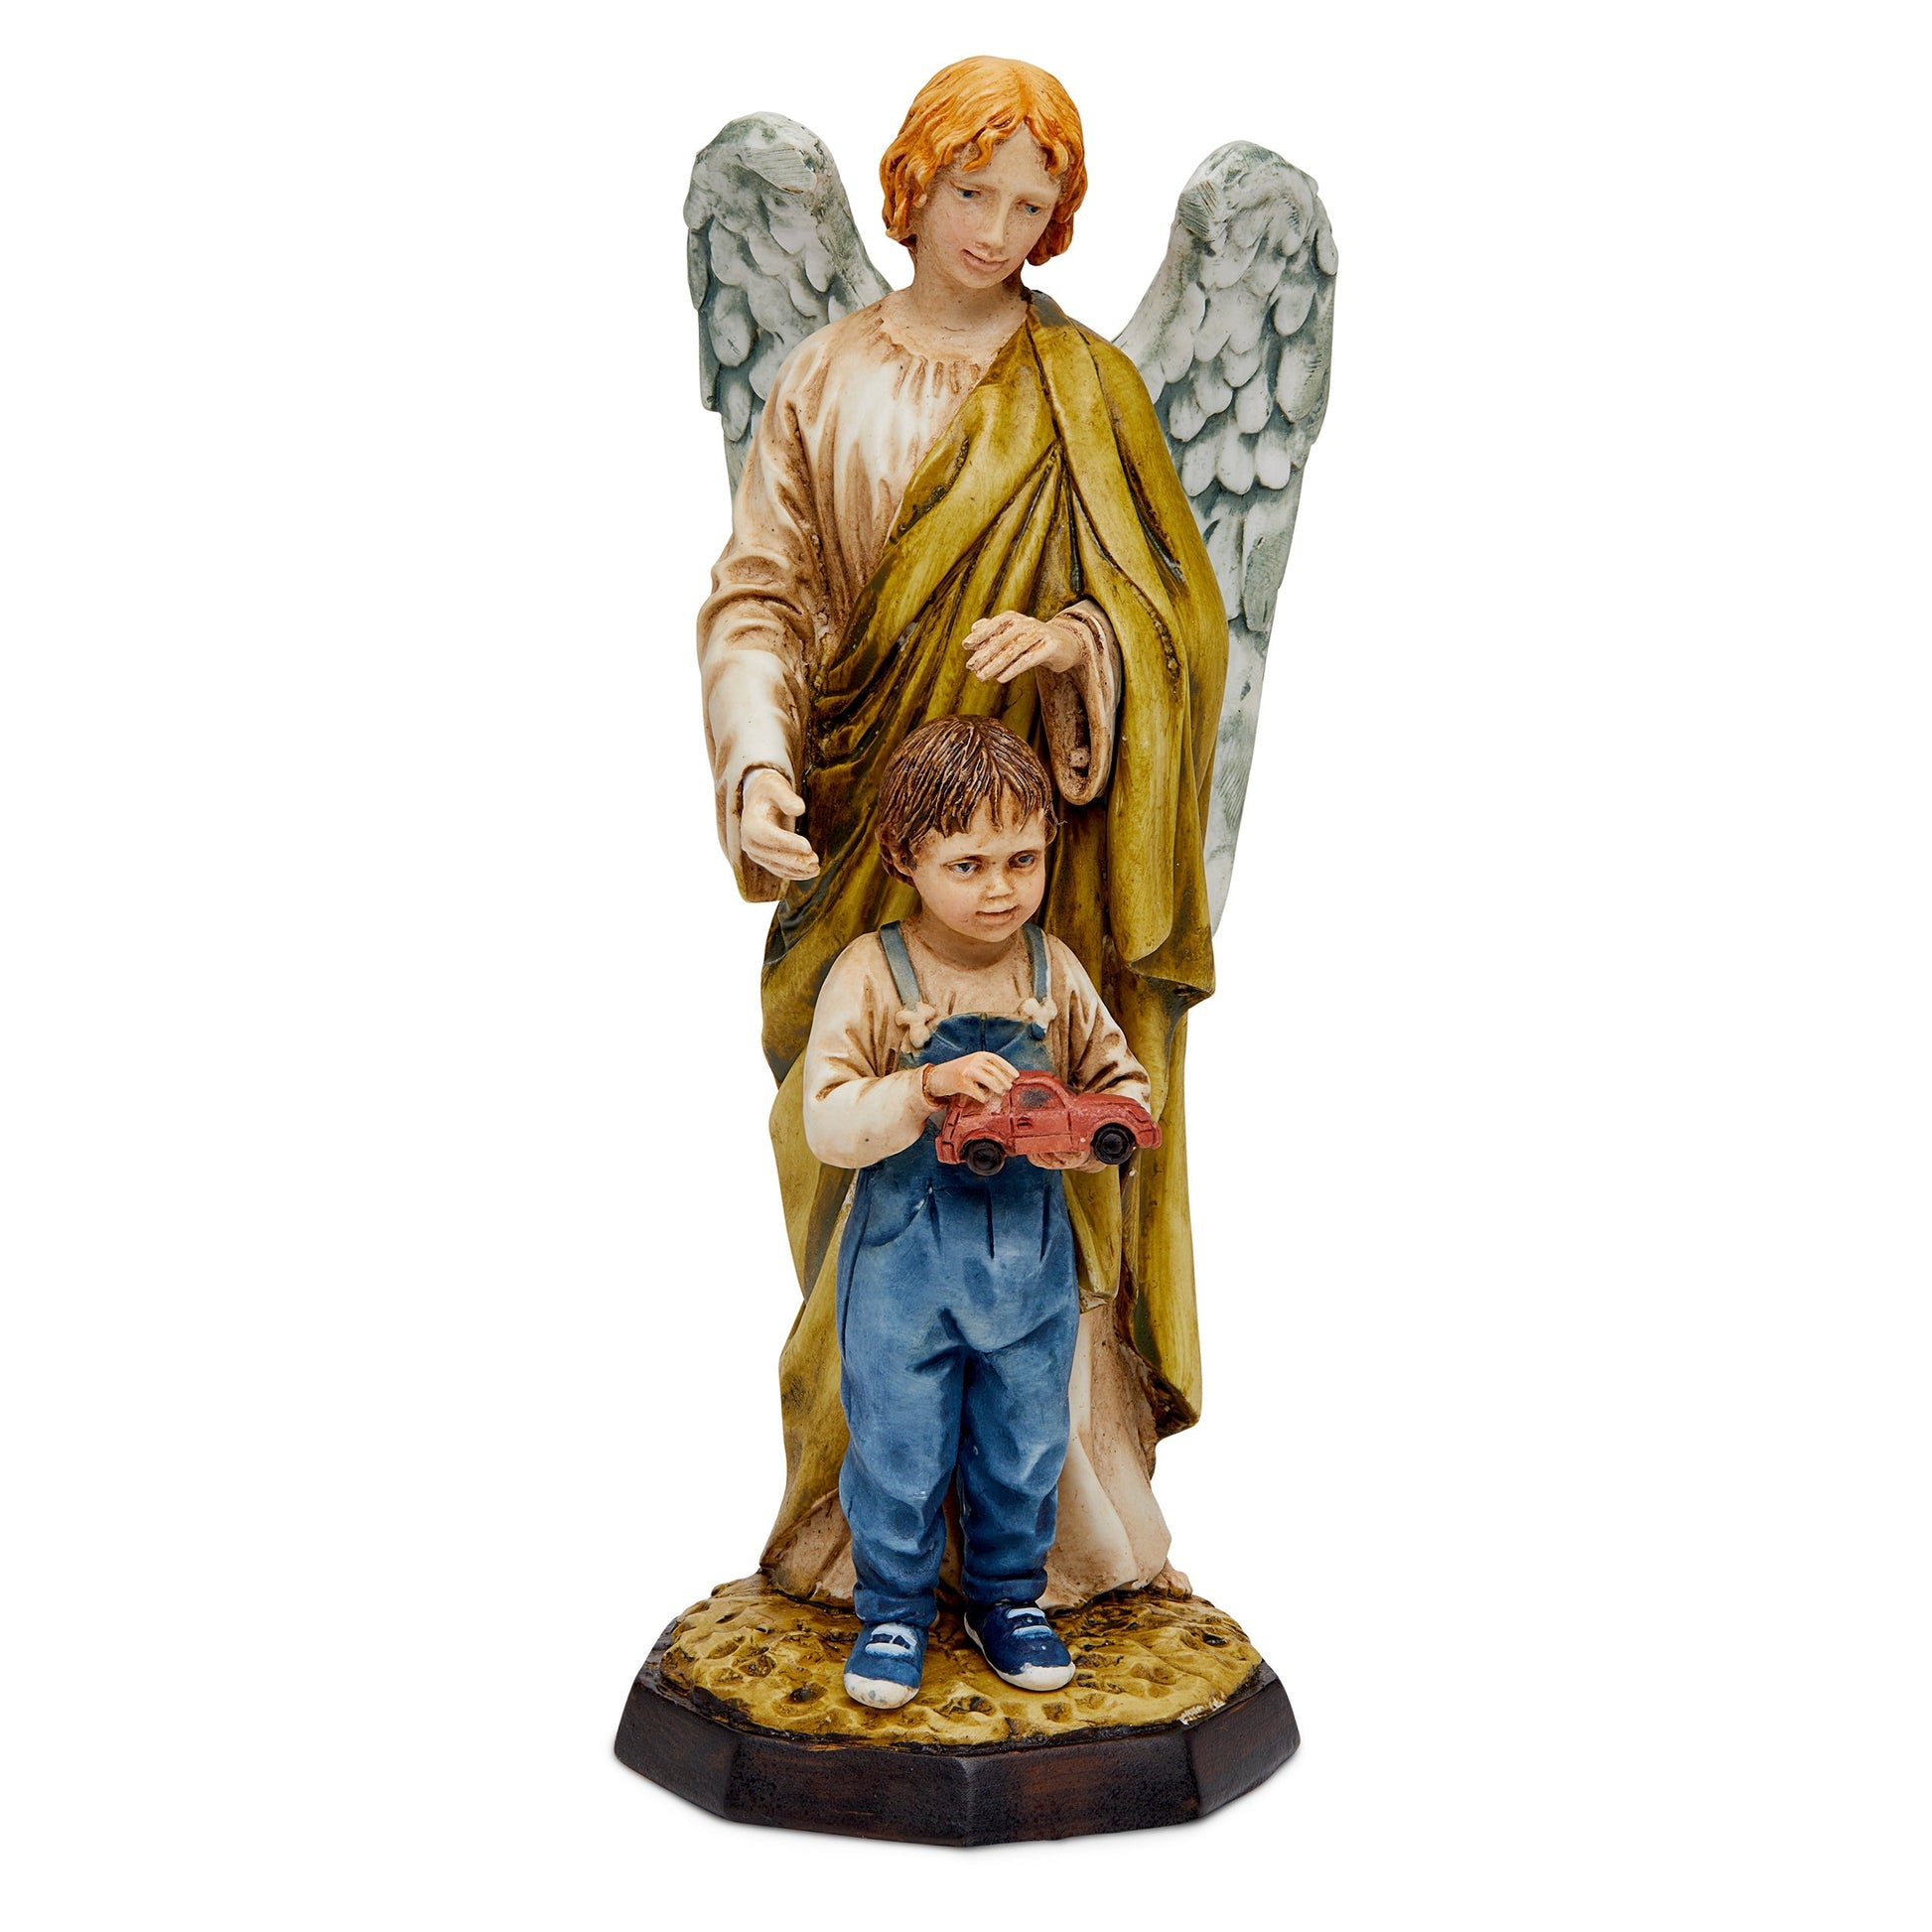 Mondo Cattolico 17 cm (6.69 in) Resin Statue of the Guardian Angel With a Child